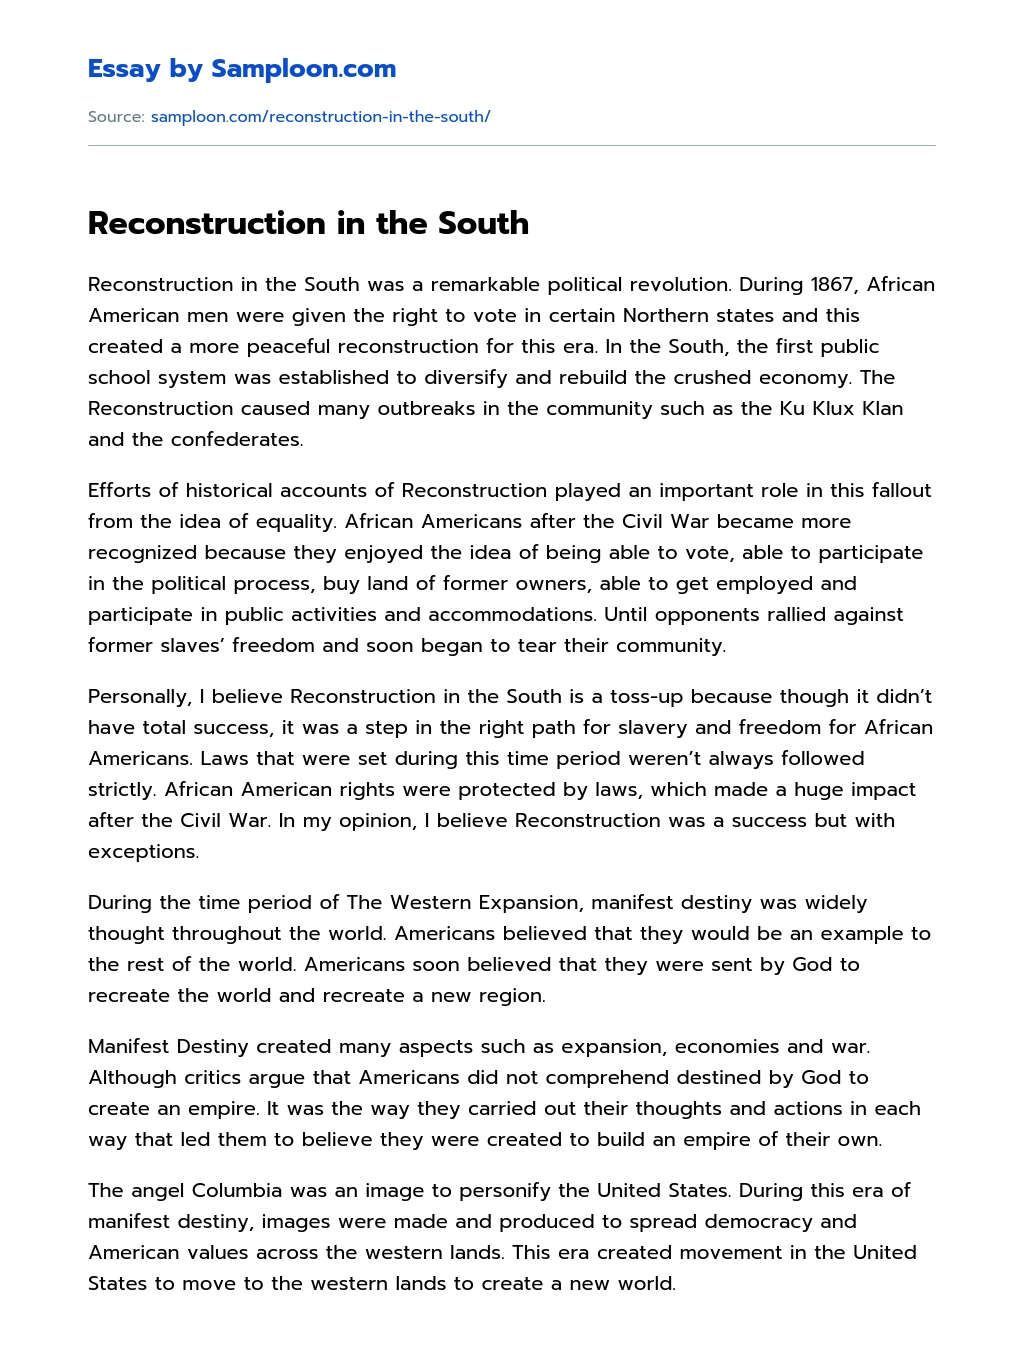 Reconstruction in the South essay